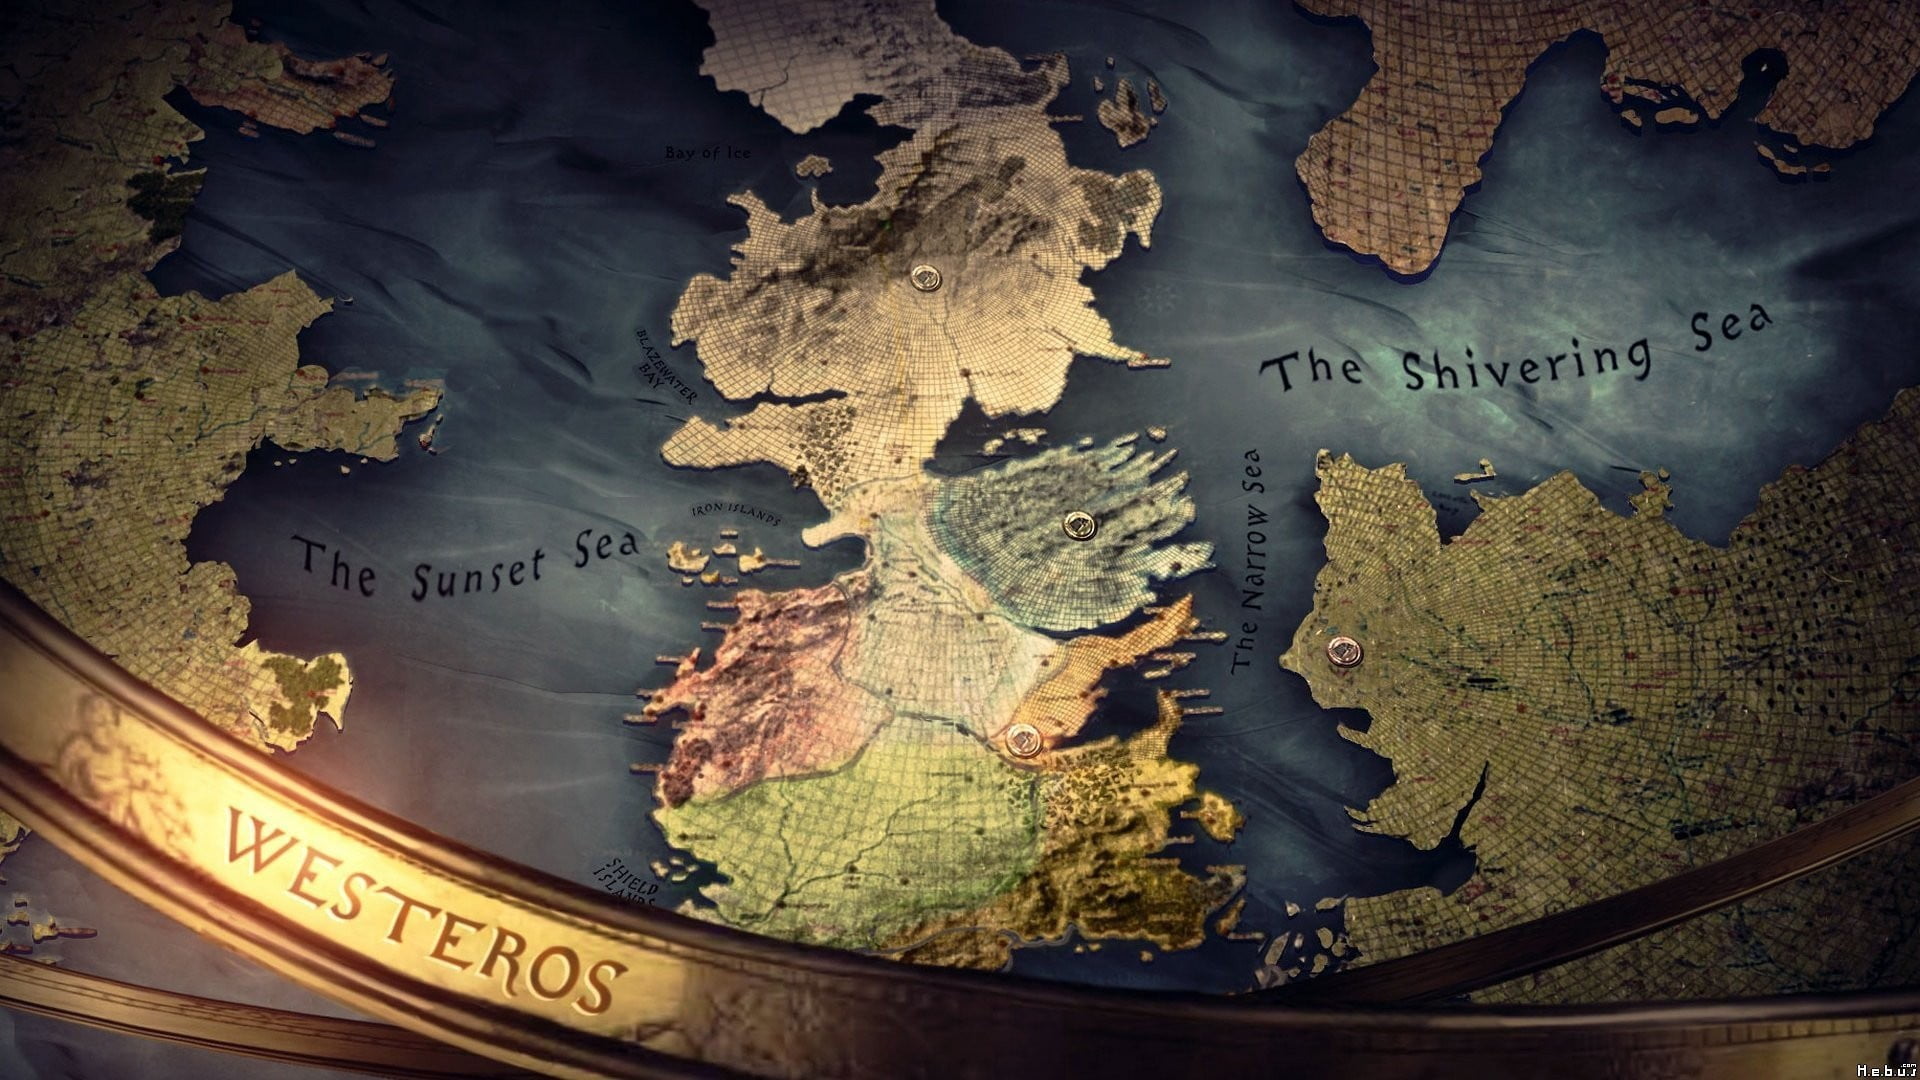 The Sunset Sea and The Shivering Sea map, Game of Thrones, no people